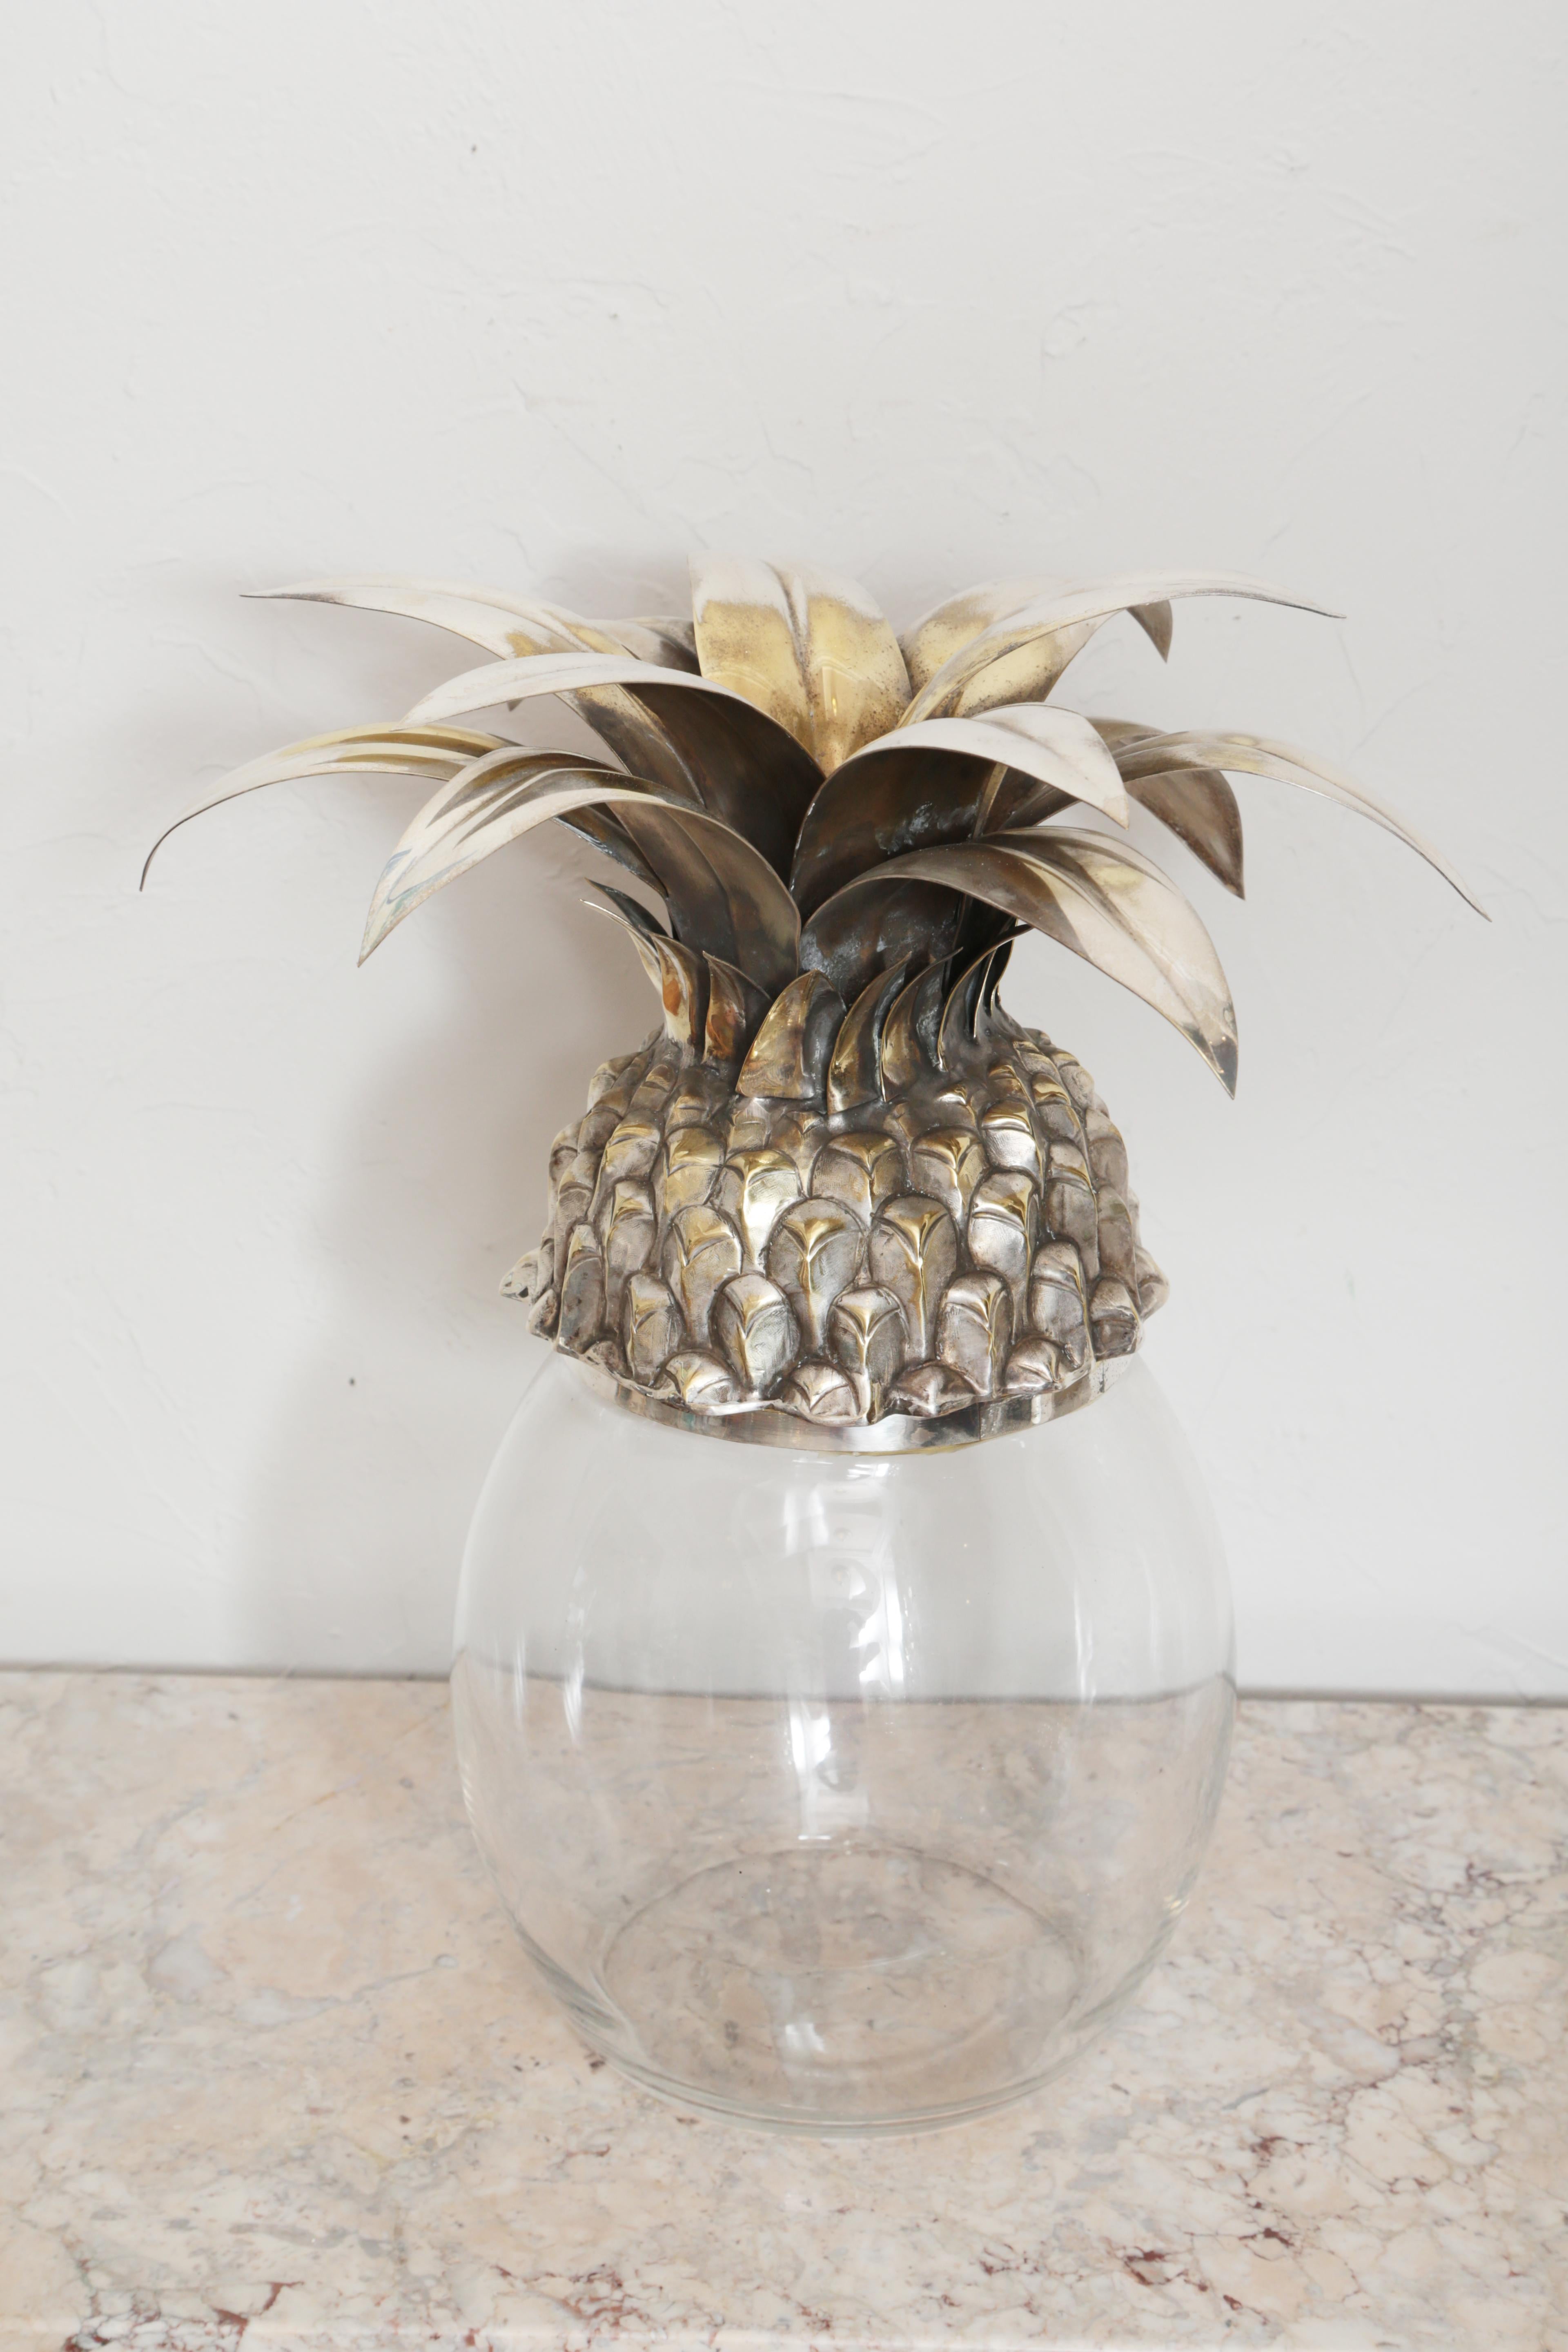 Italian midcentury silver plated pineapple topped glass ice bucket.